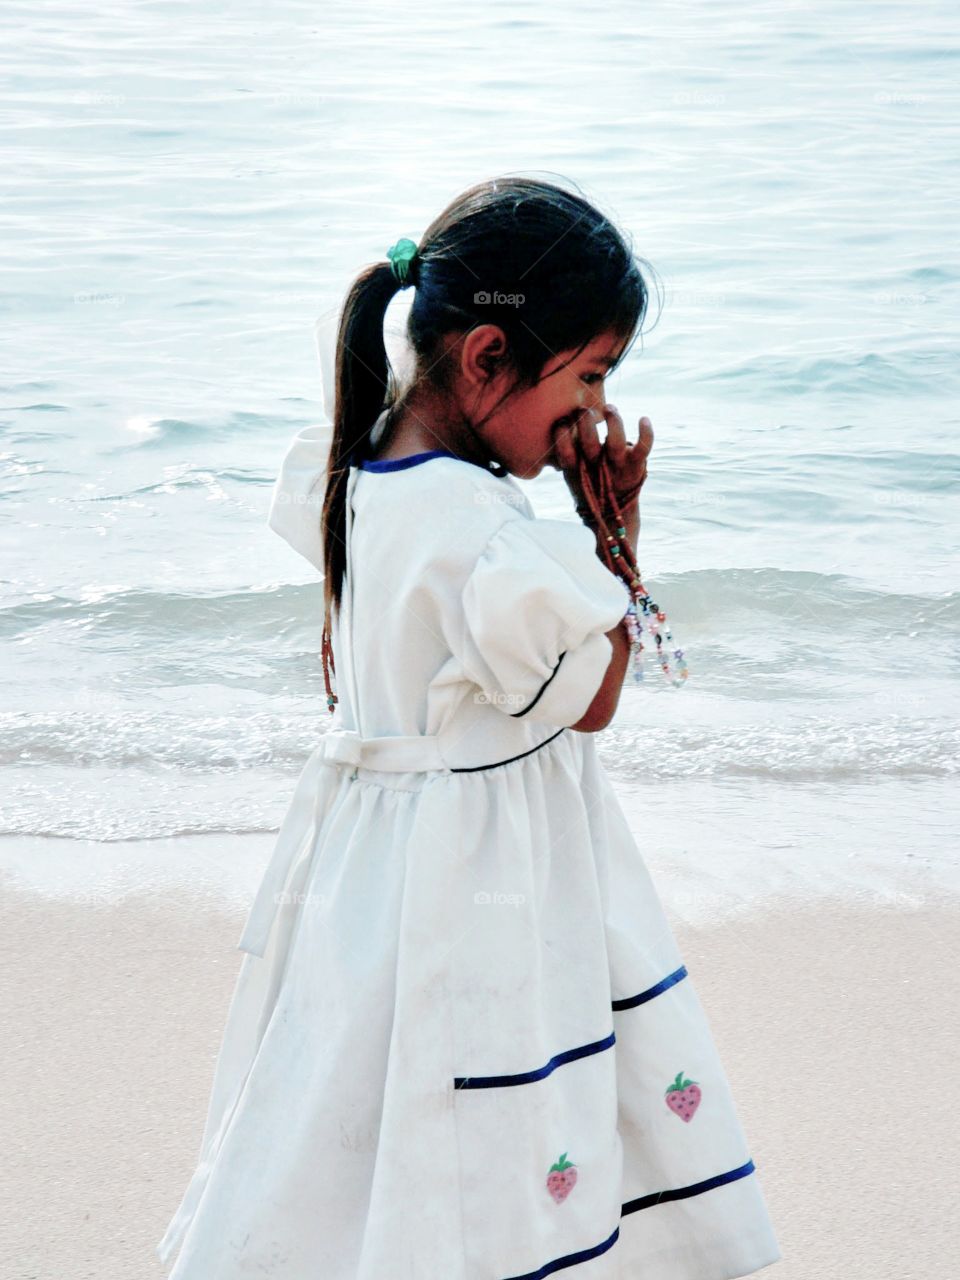 Child on beach from church